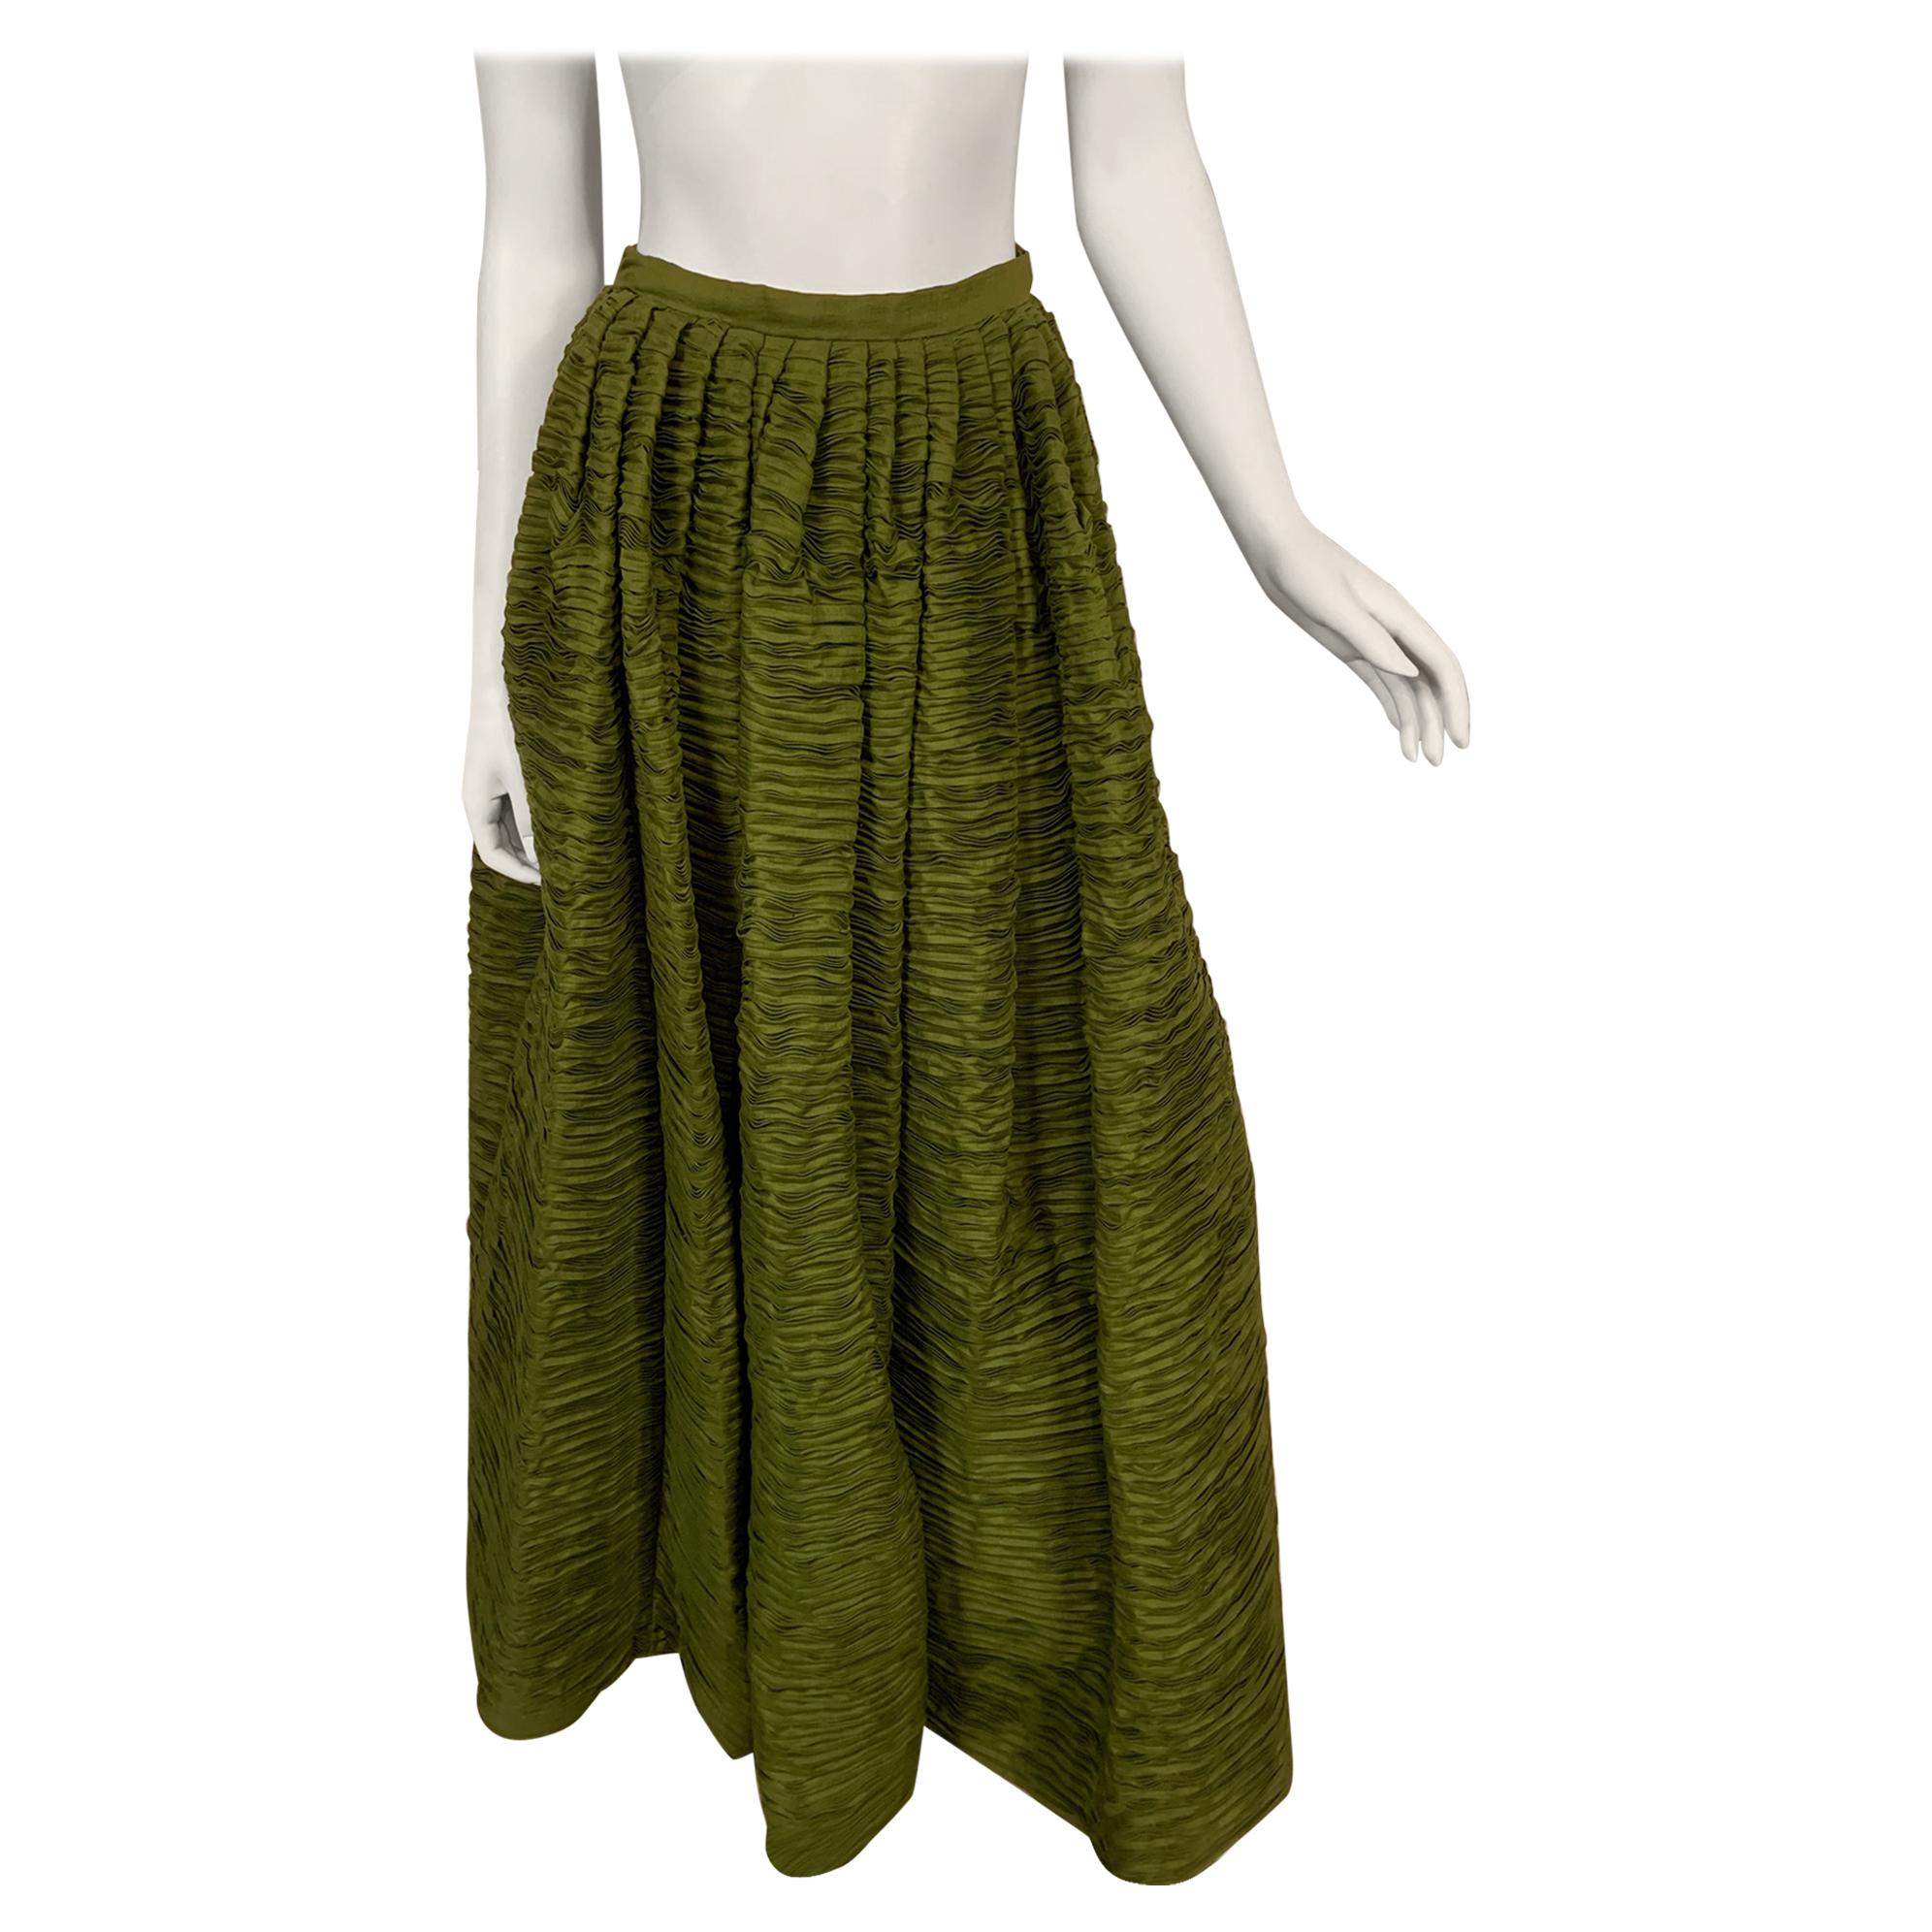 Sybil Connolly Haute Couture Olive Green Hand Pleated Linen Evening Skirt 